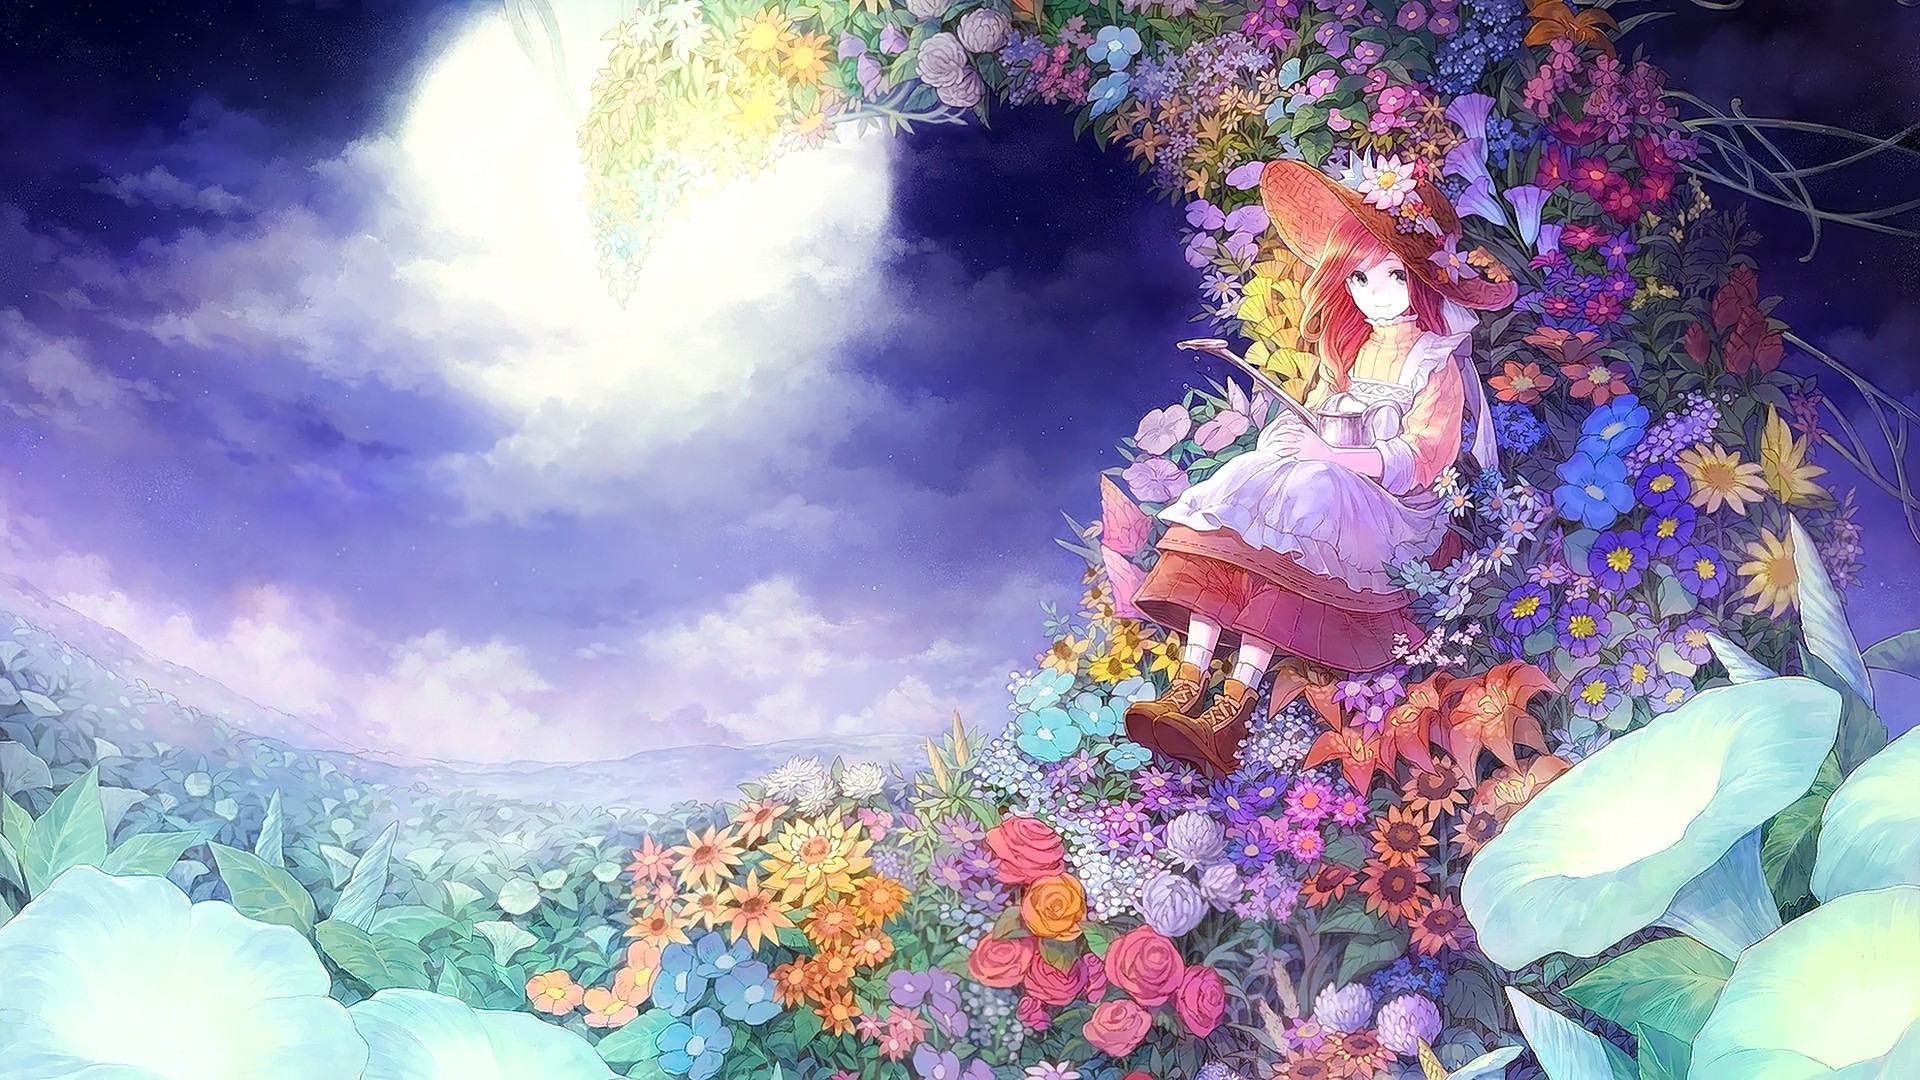 Anime 1920x1080 anime girls anime pink hair hat flowers sky clouds sitting looking at viewer original characters Moon plants colorful fantasy art fantasy girl